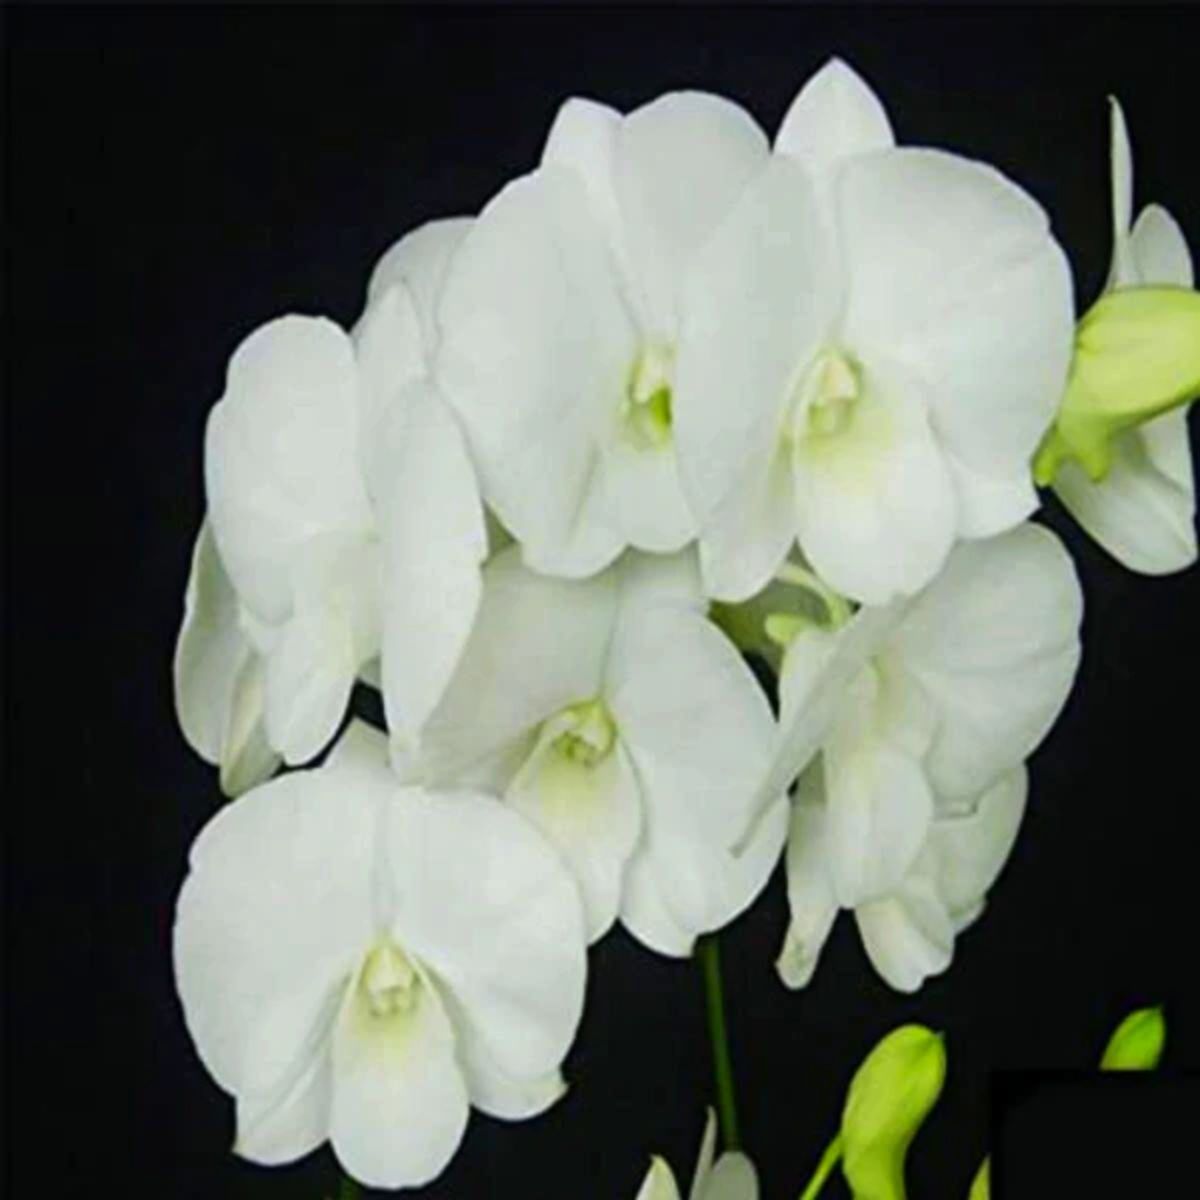 Dendrobium Airy White Orchid - Pure White Petals and Serene Elegance